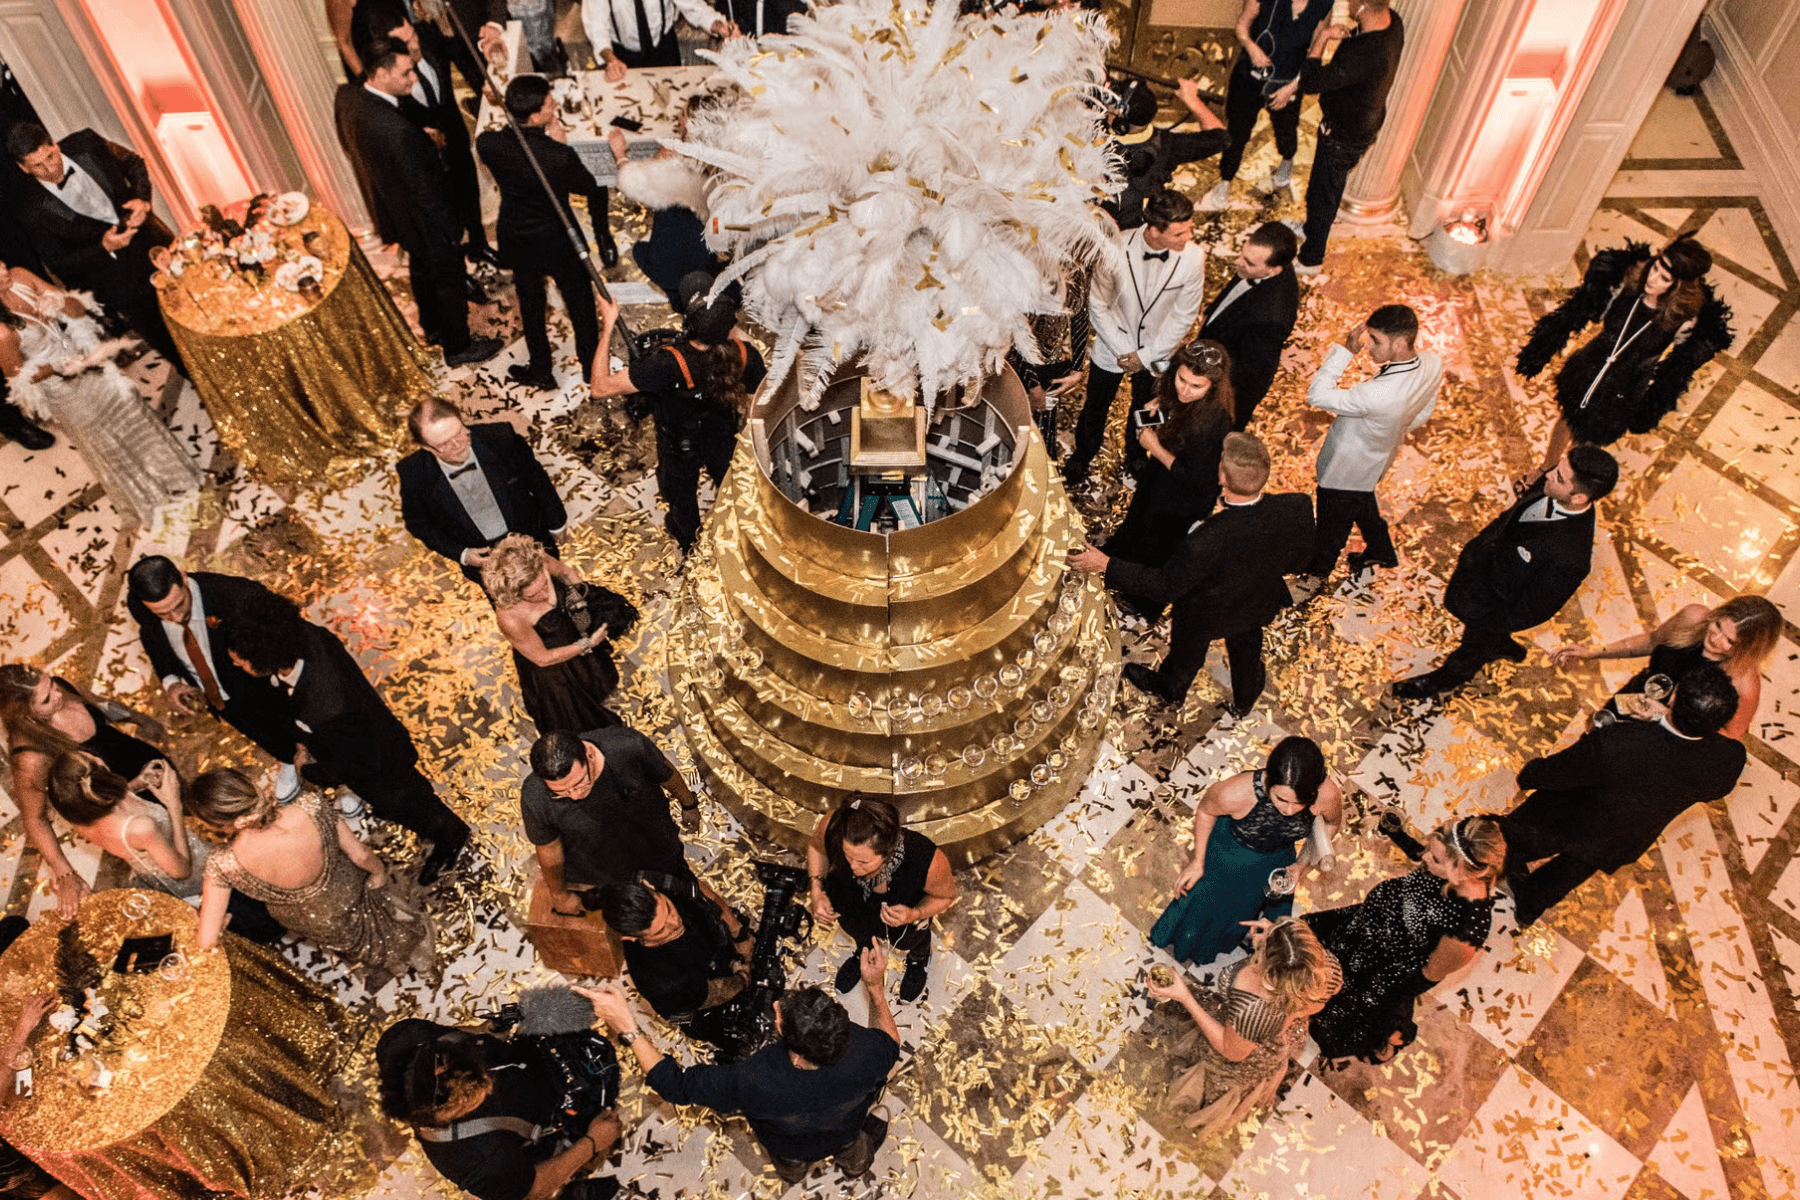 A formal party viewed from above with gold tiered tables, white ostrich feathers, marble checkerboard floors, and party goers in black tie outfits.